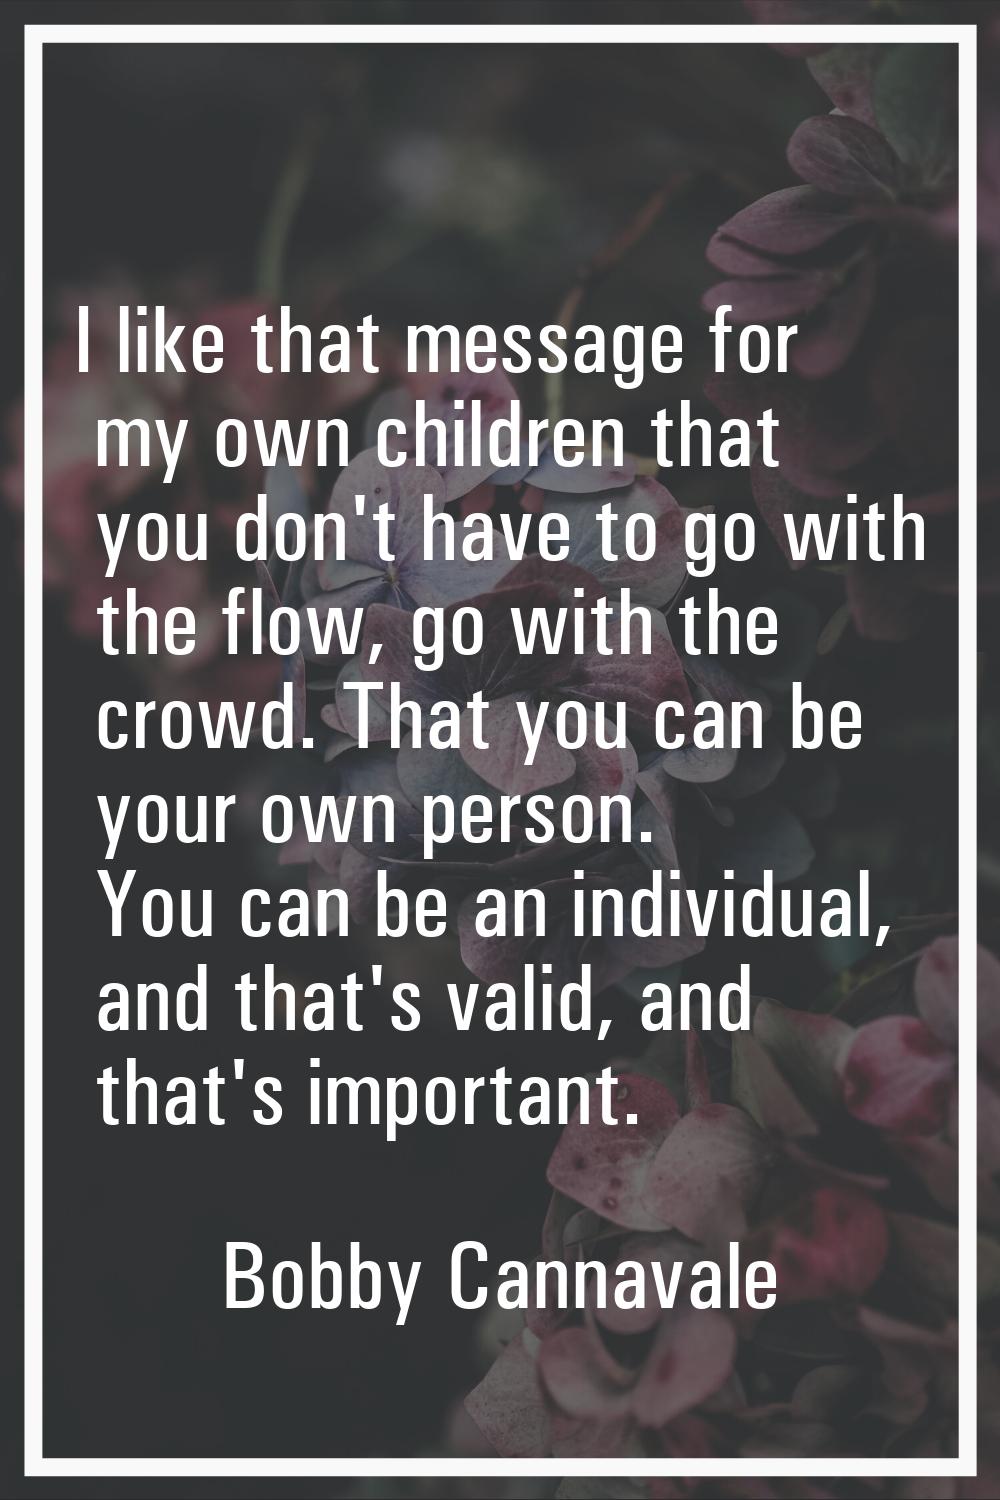 I like that message for my own children that you don't have to go with the flow, go with the crowd.